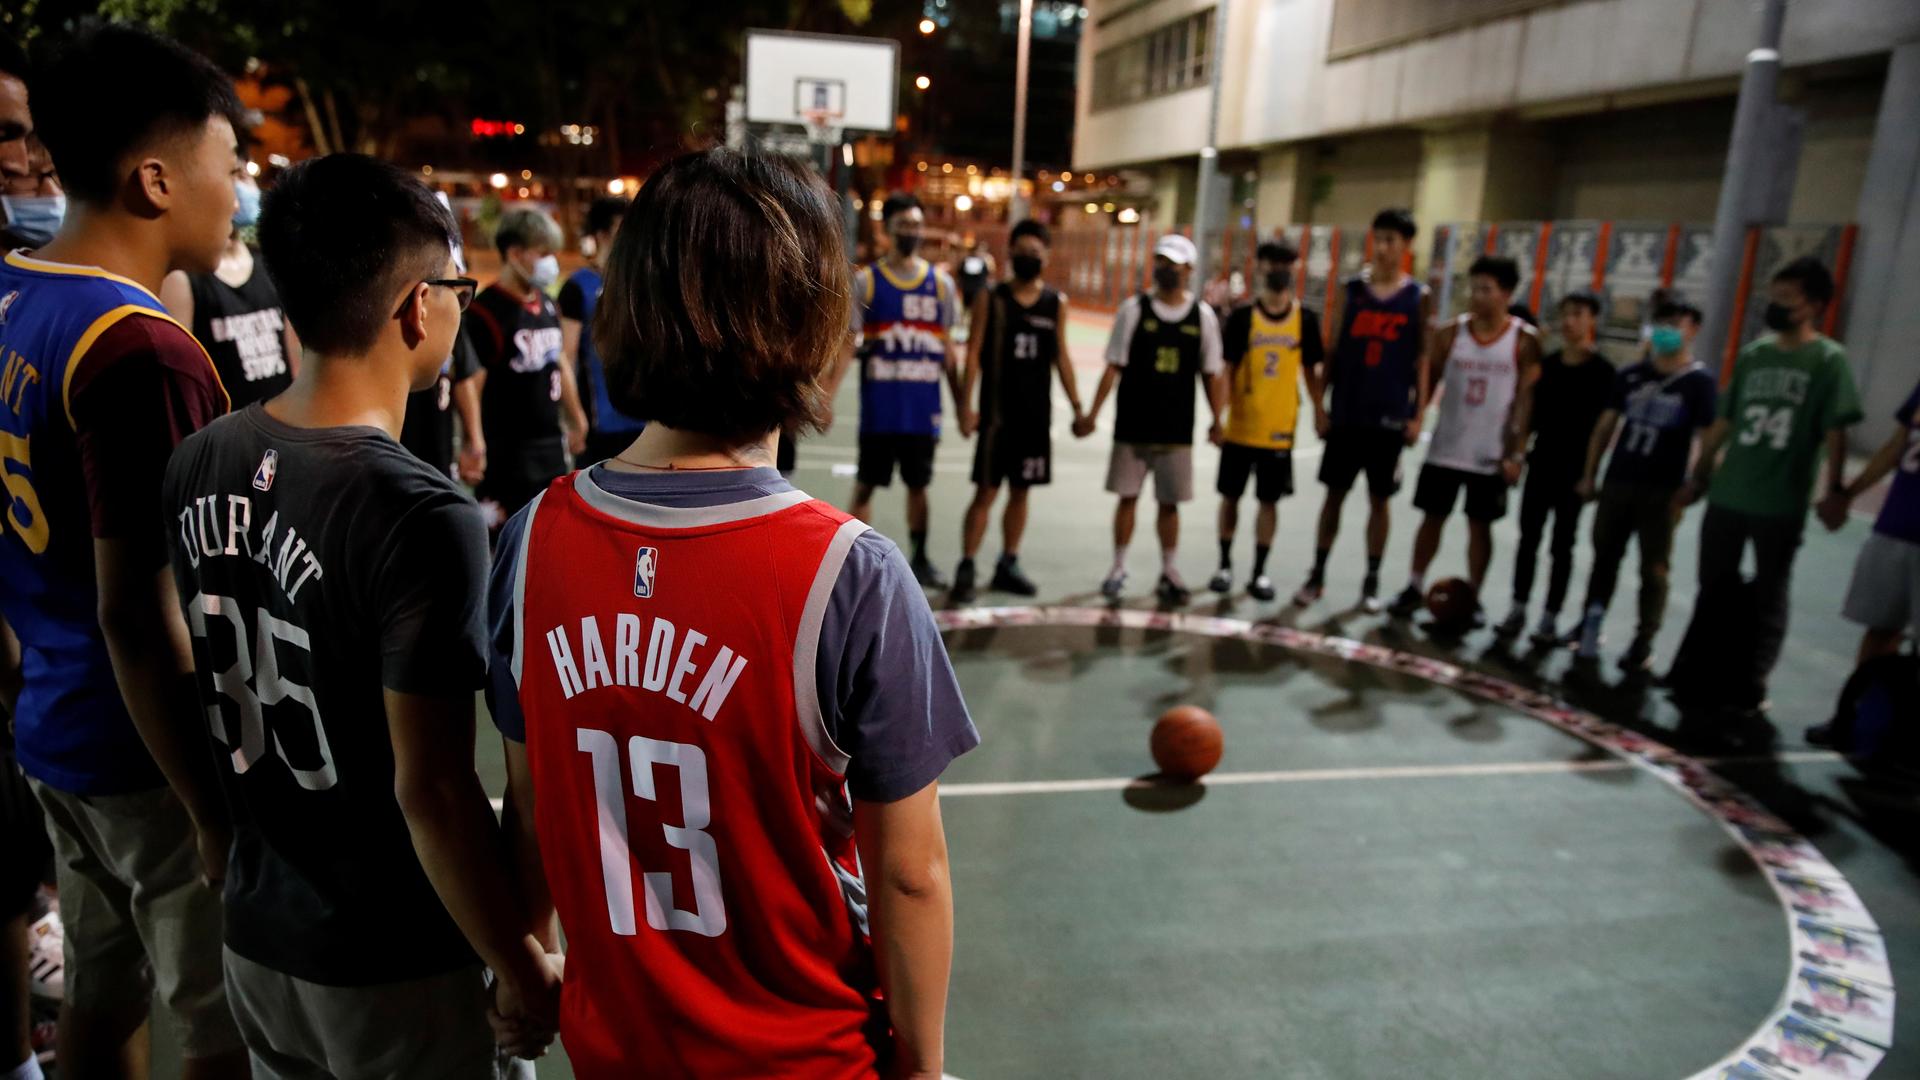 A ring of protesters in basketball uniforms